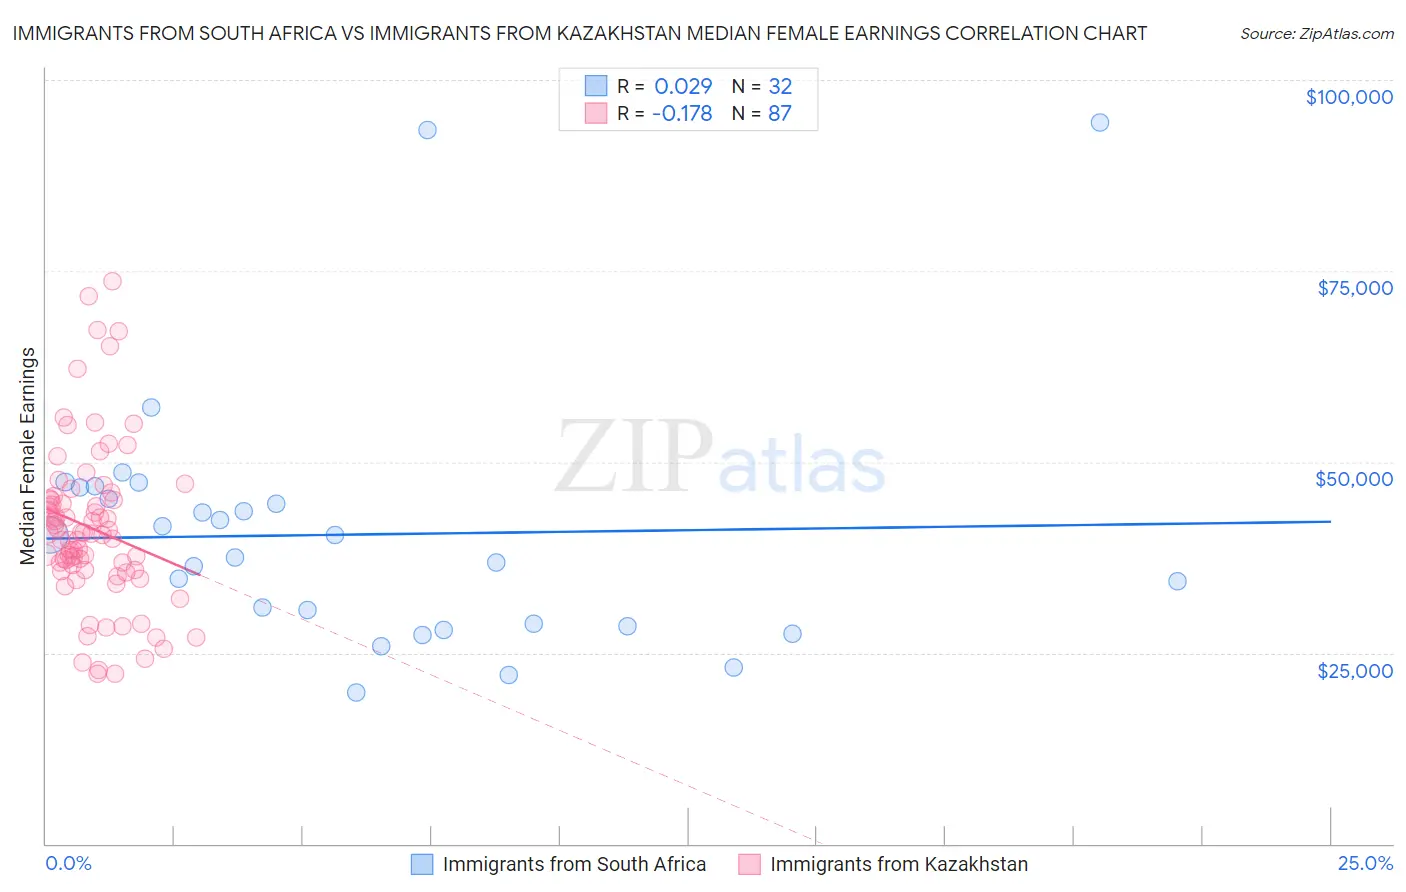 Immigrants from South Africa vs Immigrants from Kazakhstan Median Female Earnings